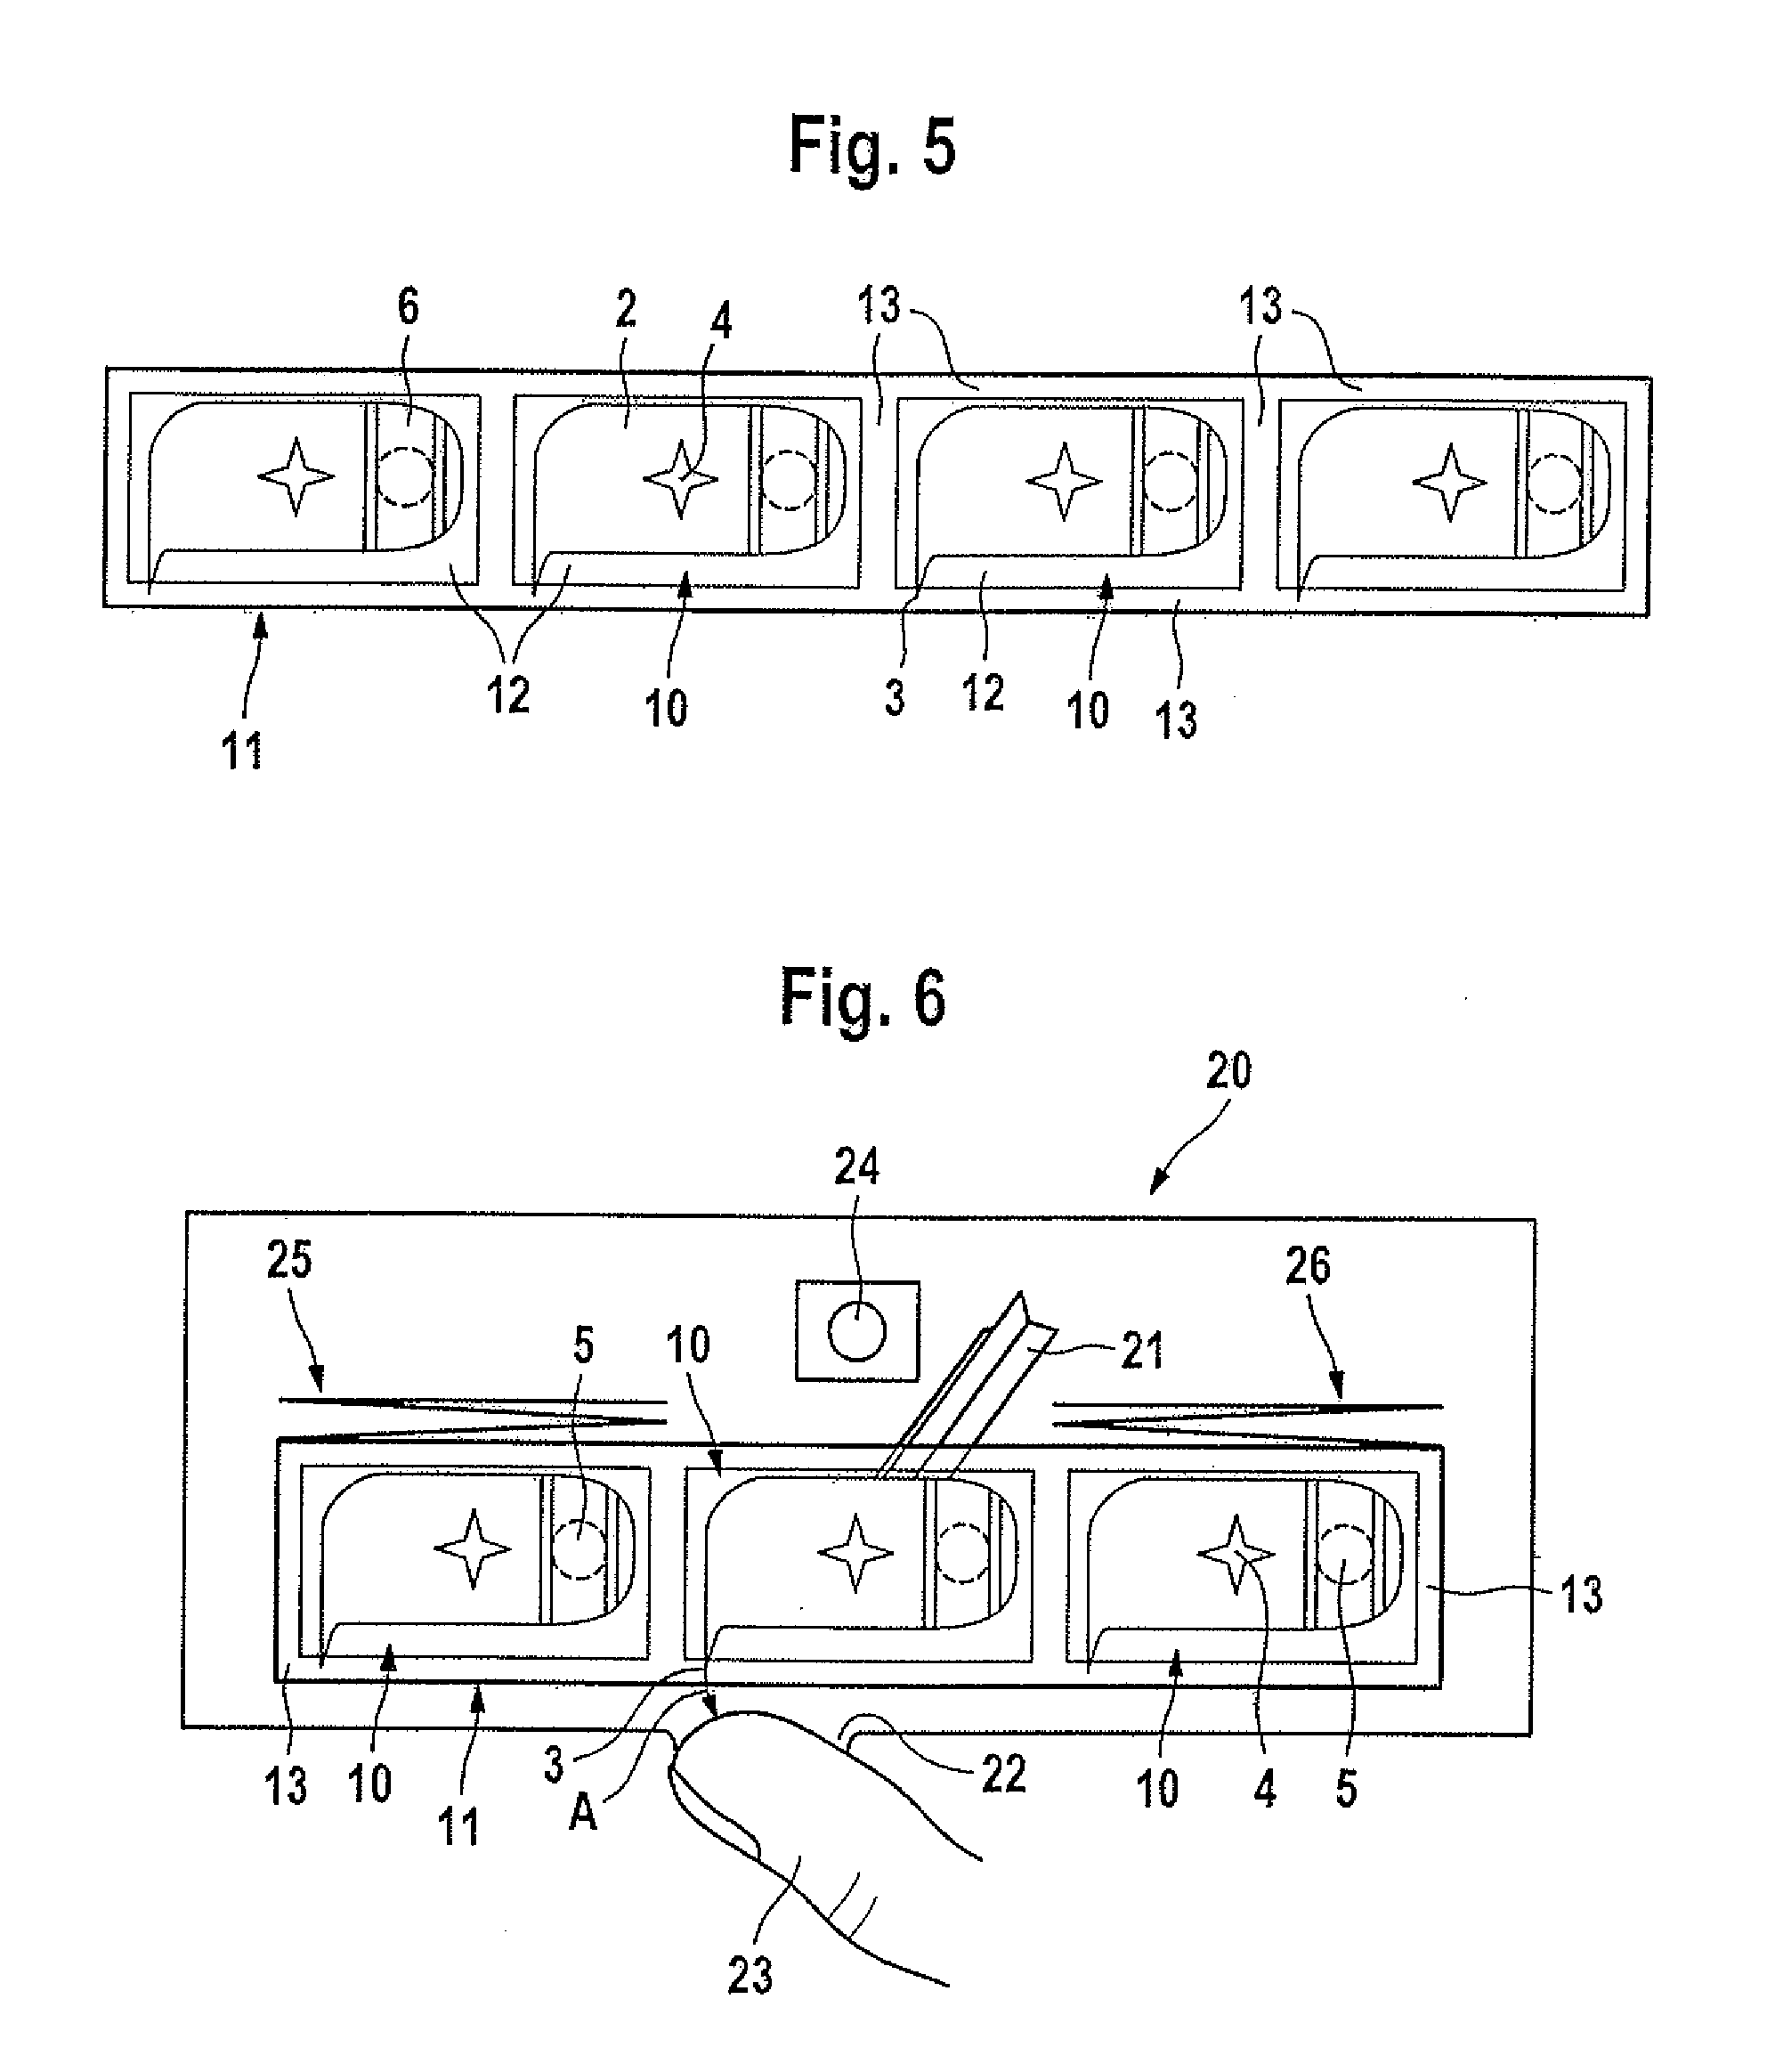 Lancet, Lancet Supply Ribbon, and Puncturing Device for Generating a Puncturing Wound